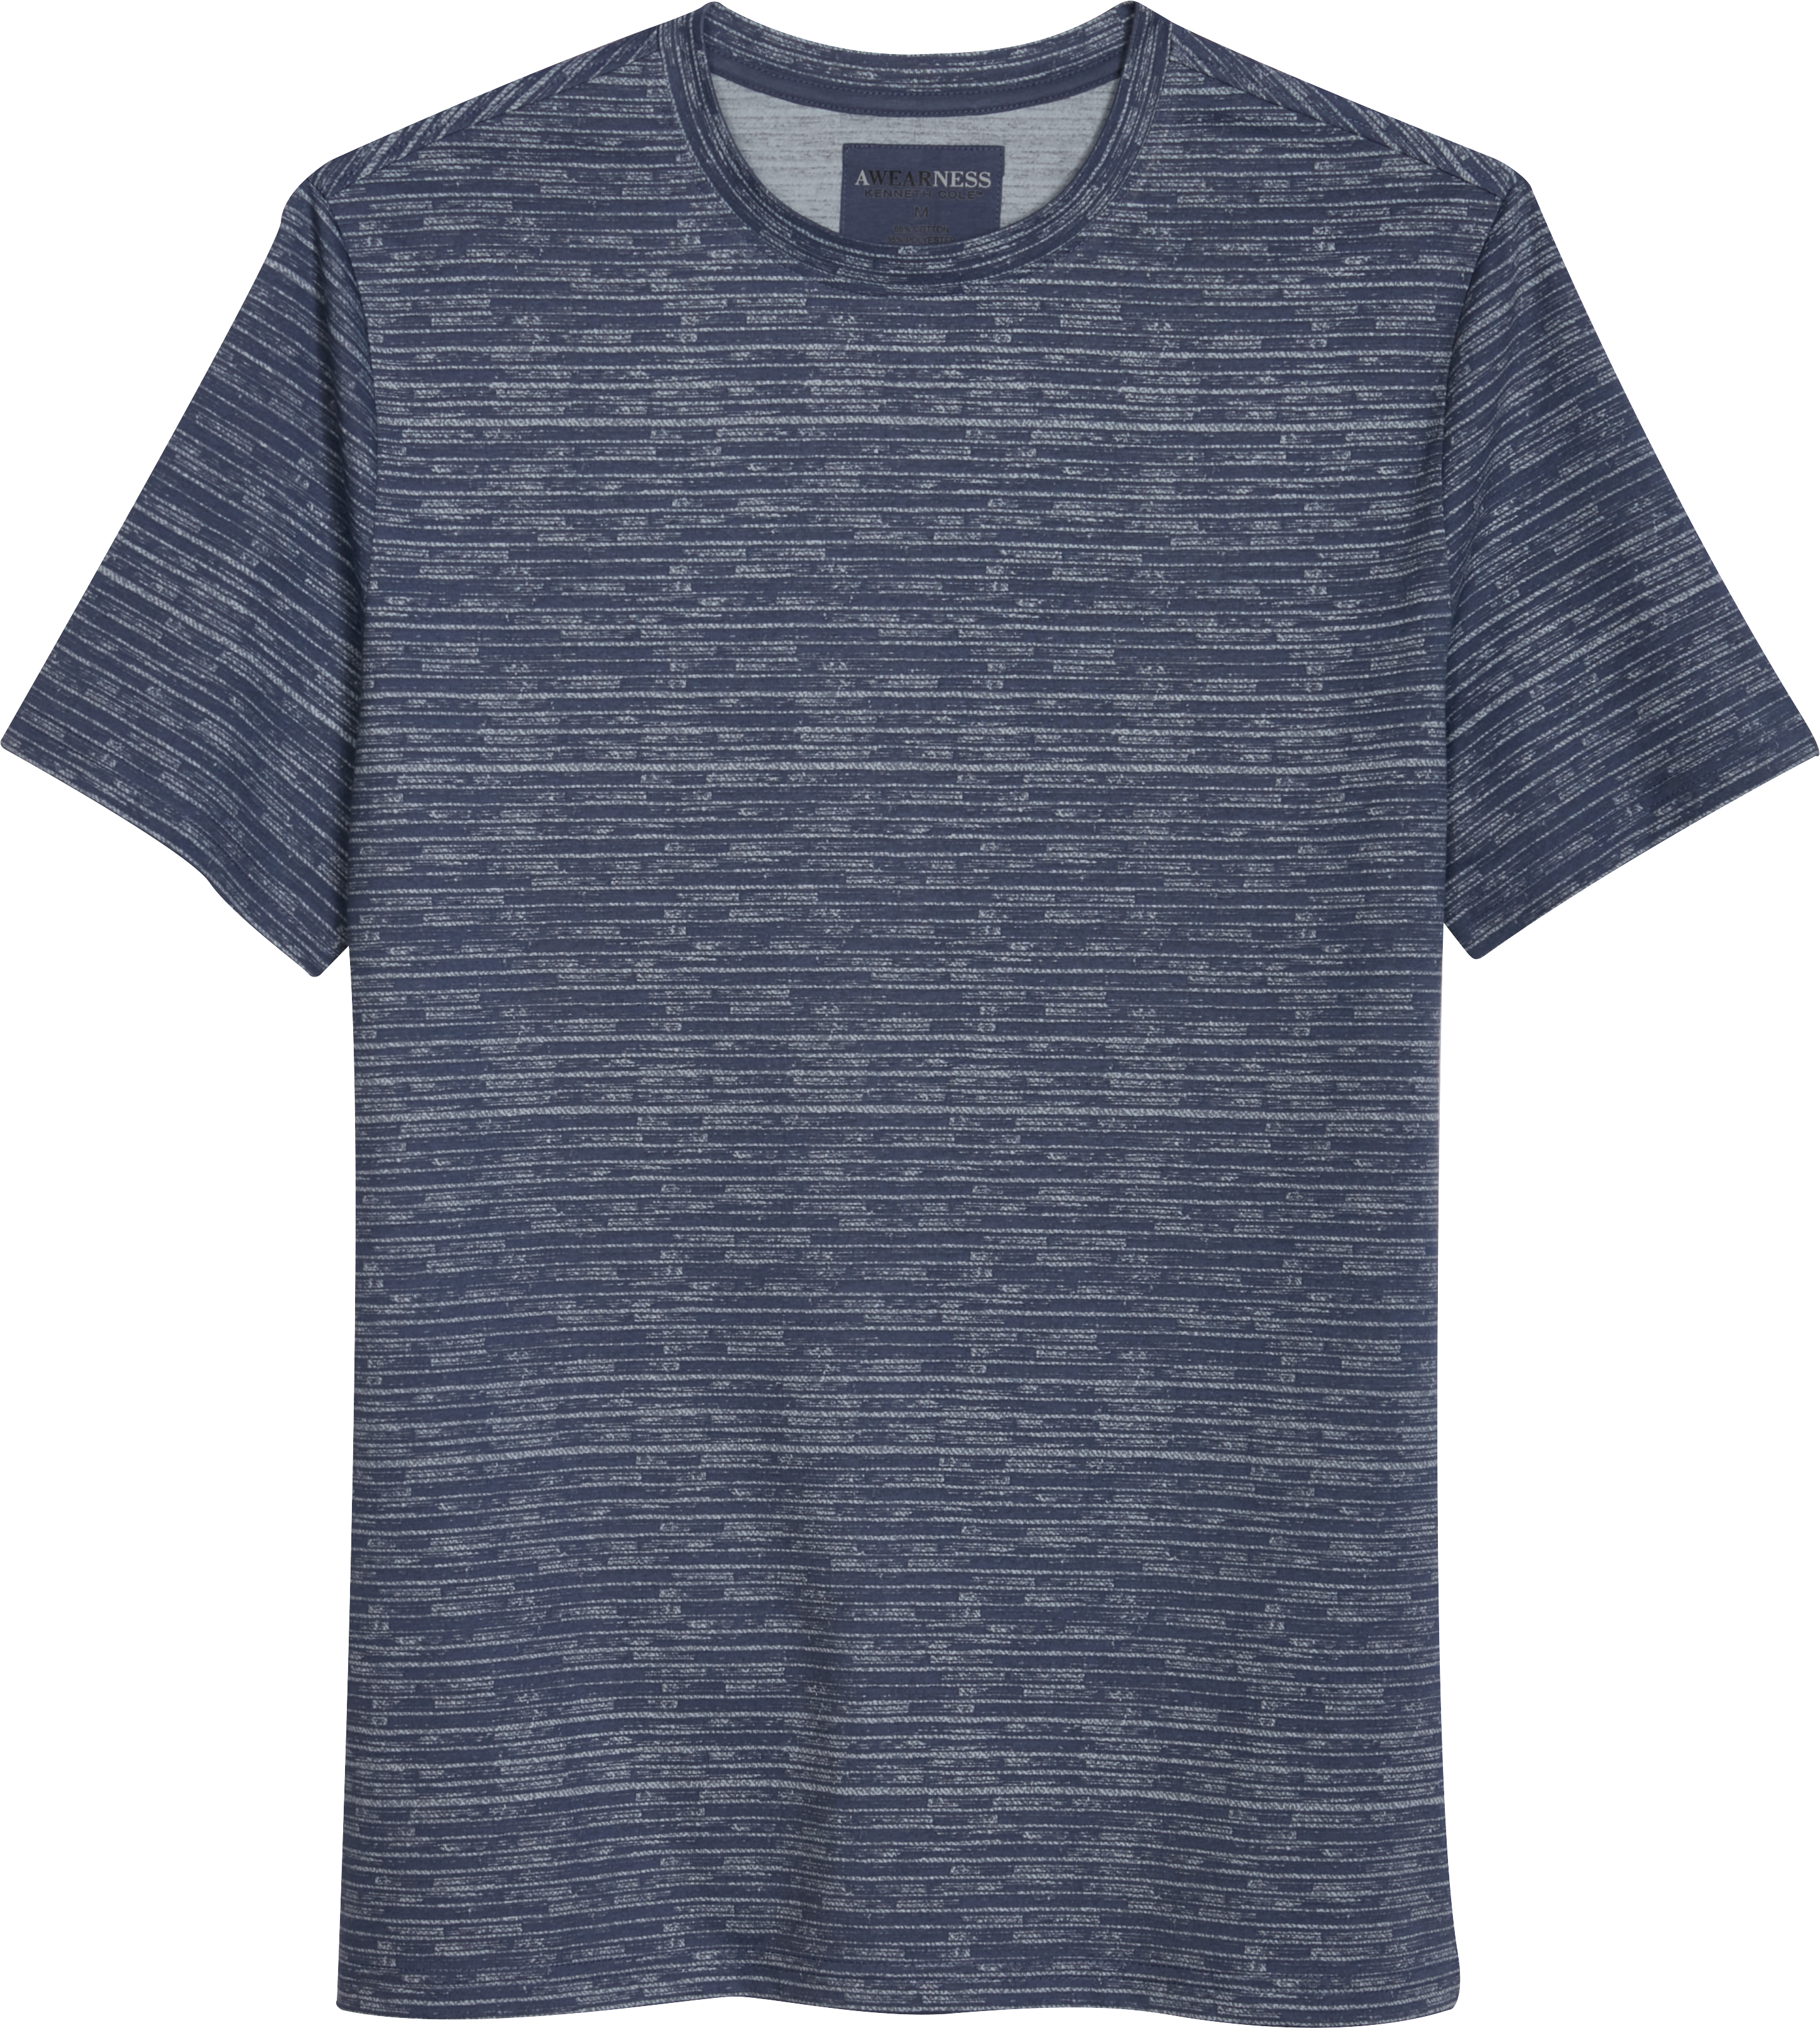 Awearness Kenneth Cole Modern Fit Crew Neck Tee, Blue Brush